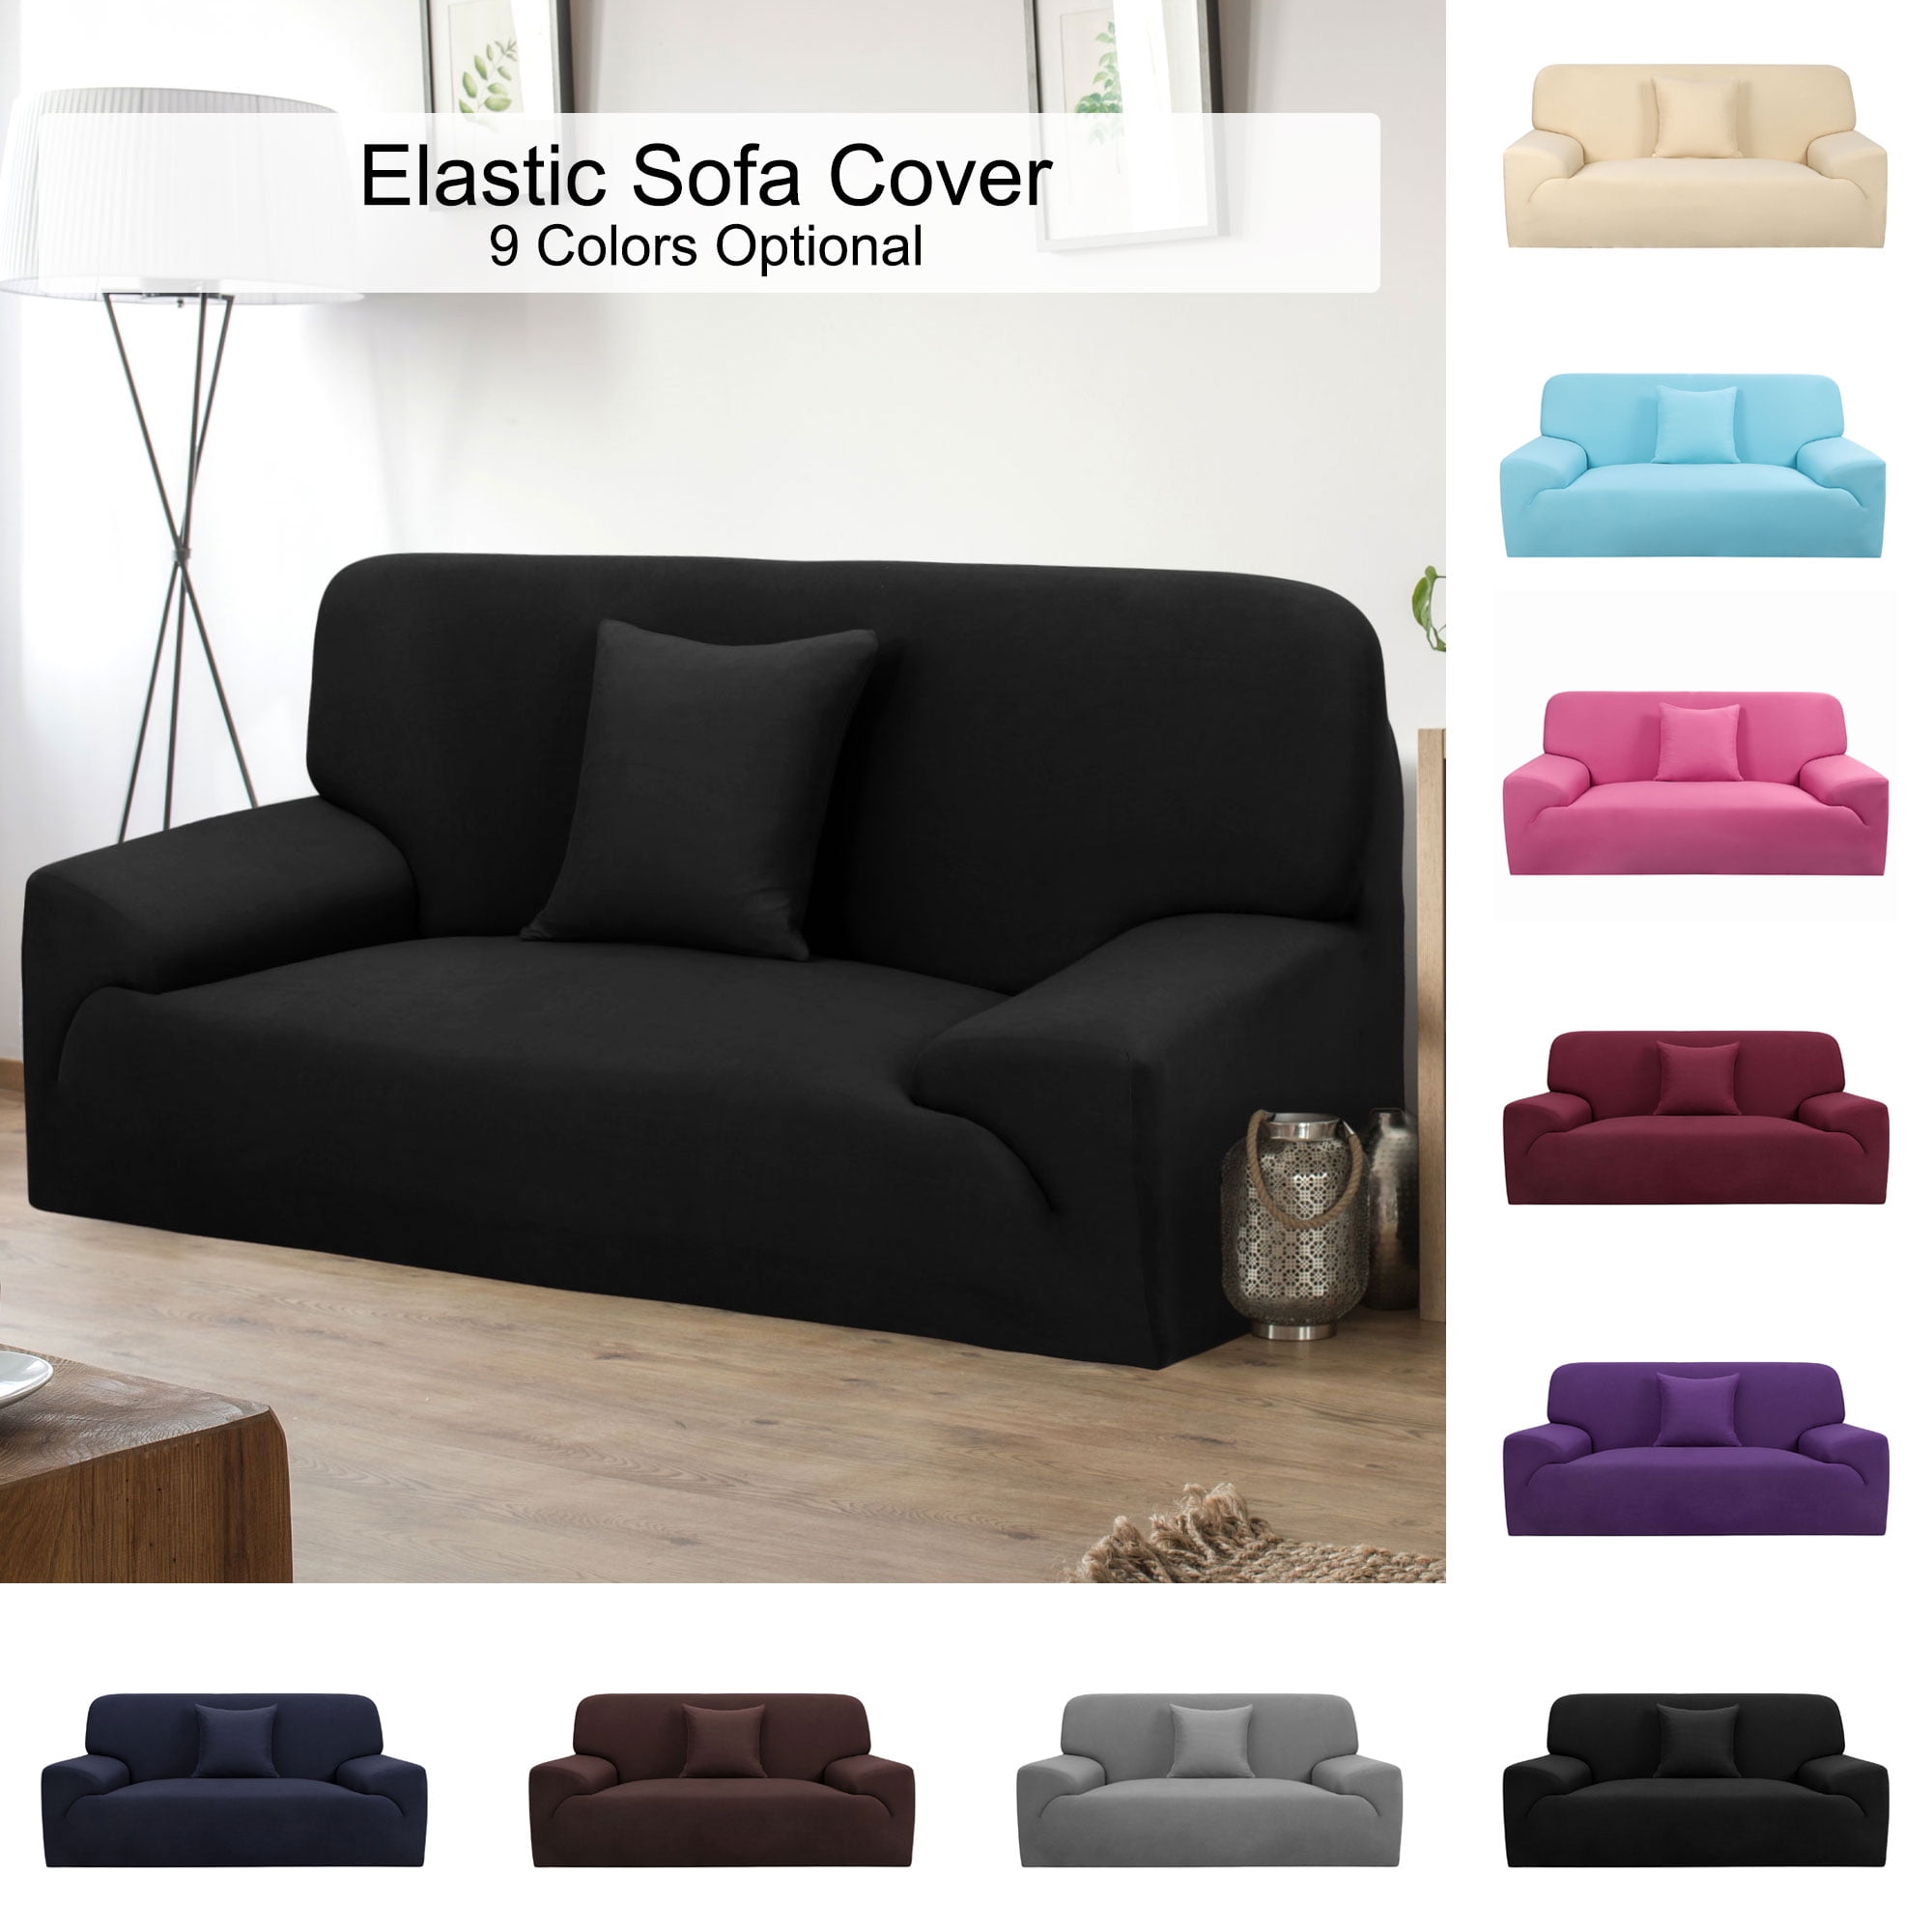 1/2/3/4 Seater Elastic Sofa Cover Slipcover Set Couch Stretch Arm Chair Loveseat 